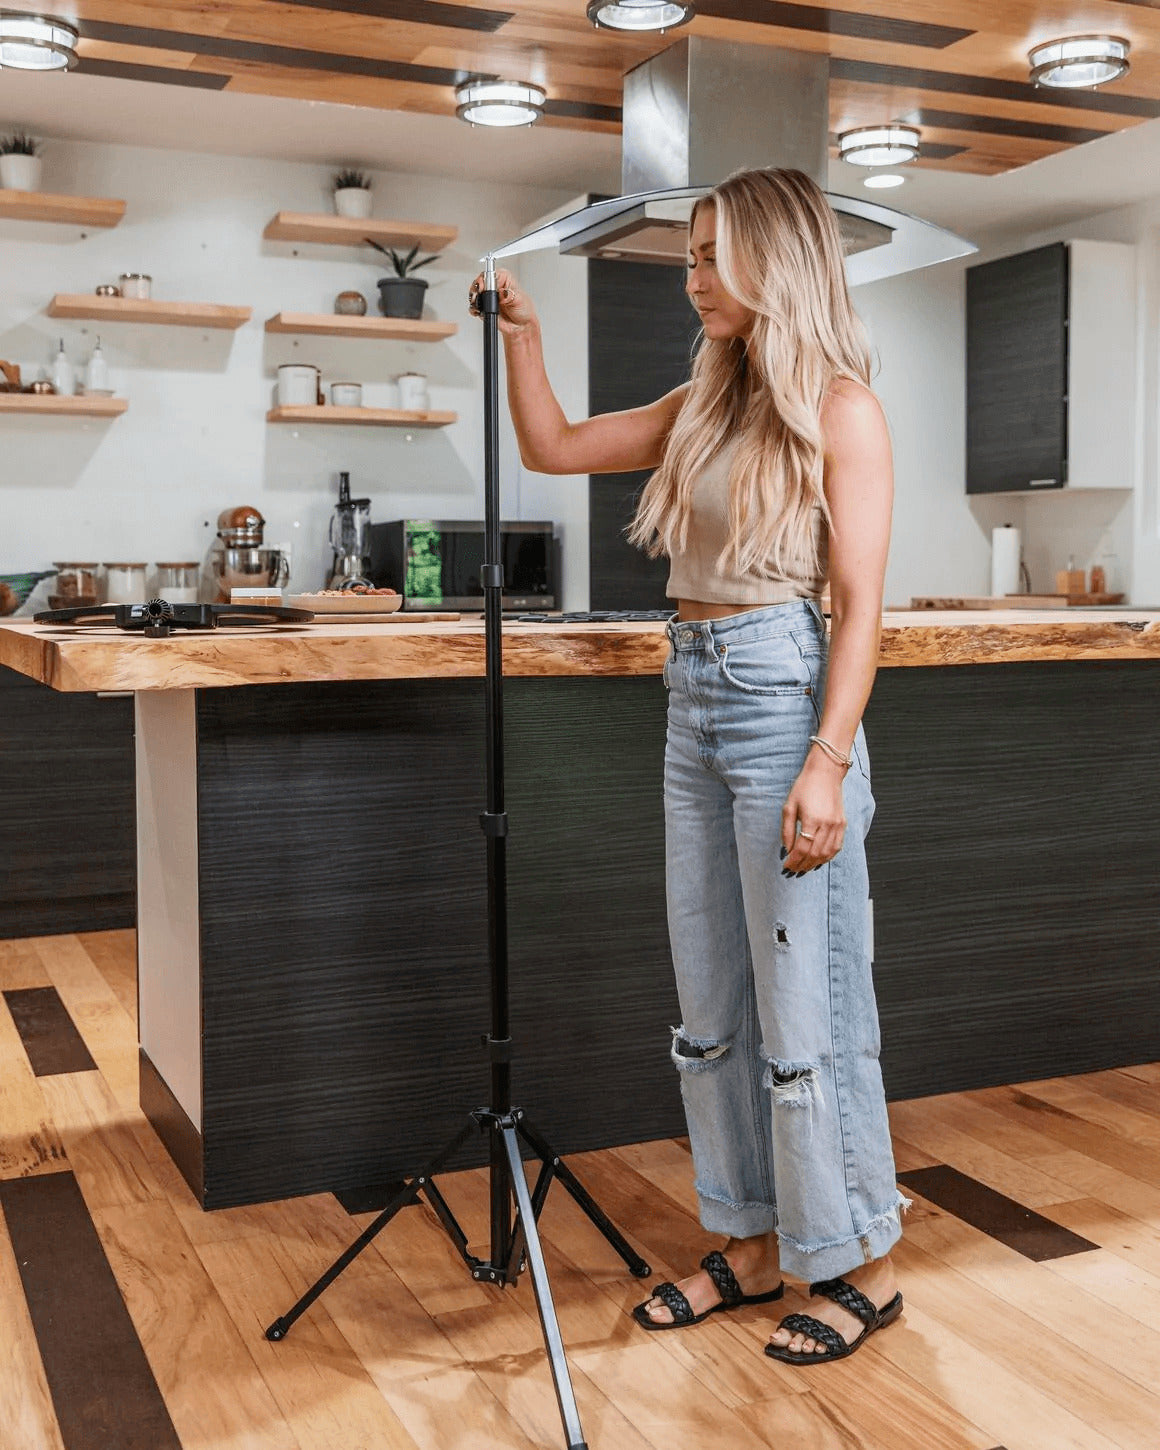 Blonde woman in kitchen standing next to an extended black metal Lume Cube 70" Light Stand that's nearly her height.